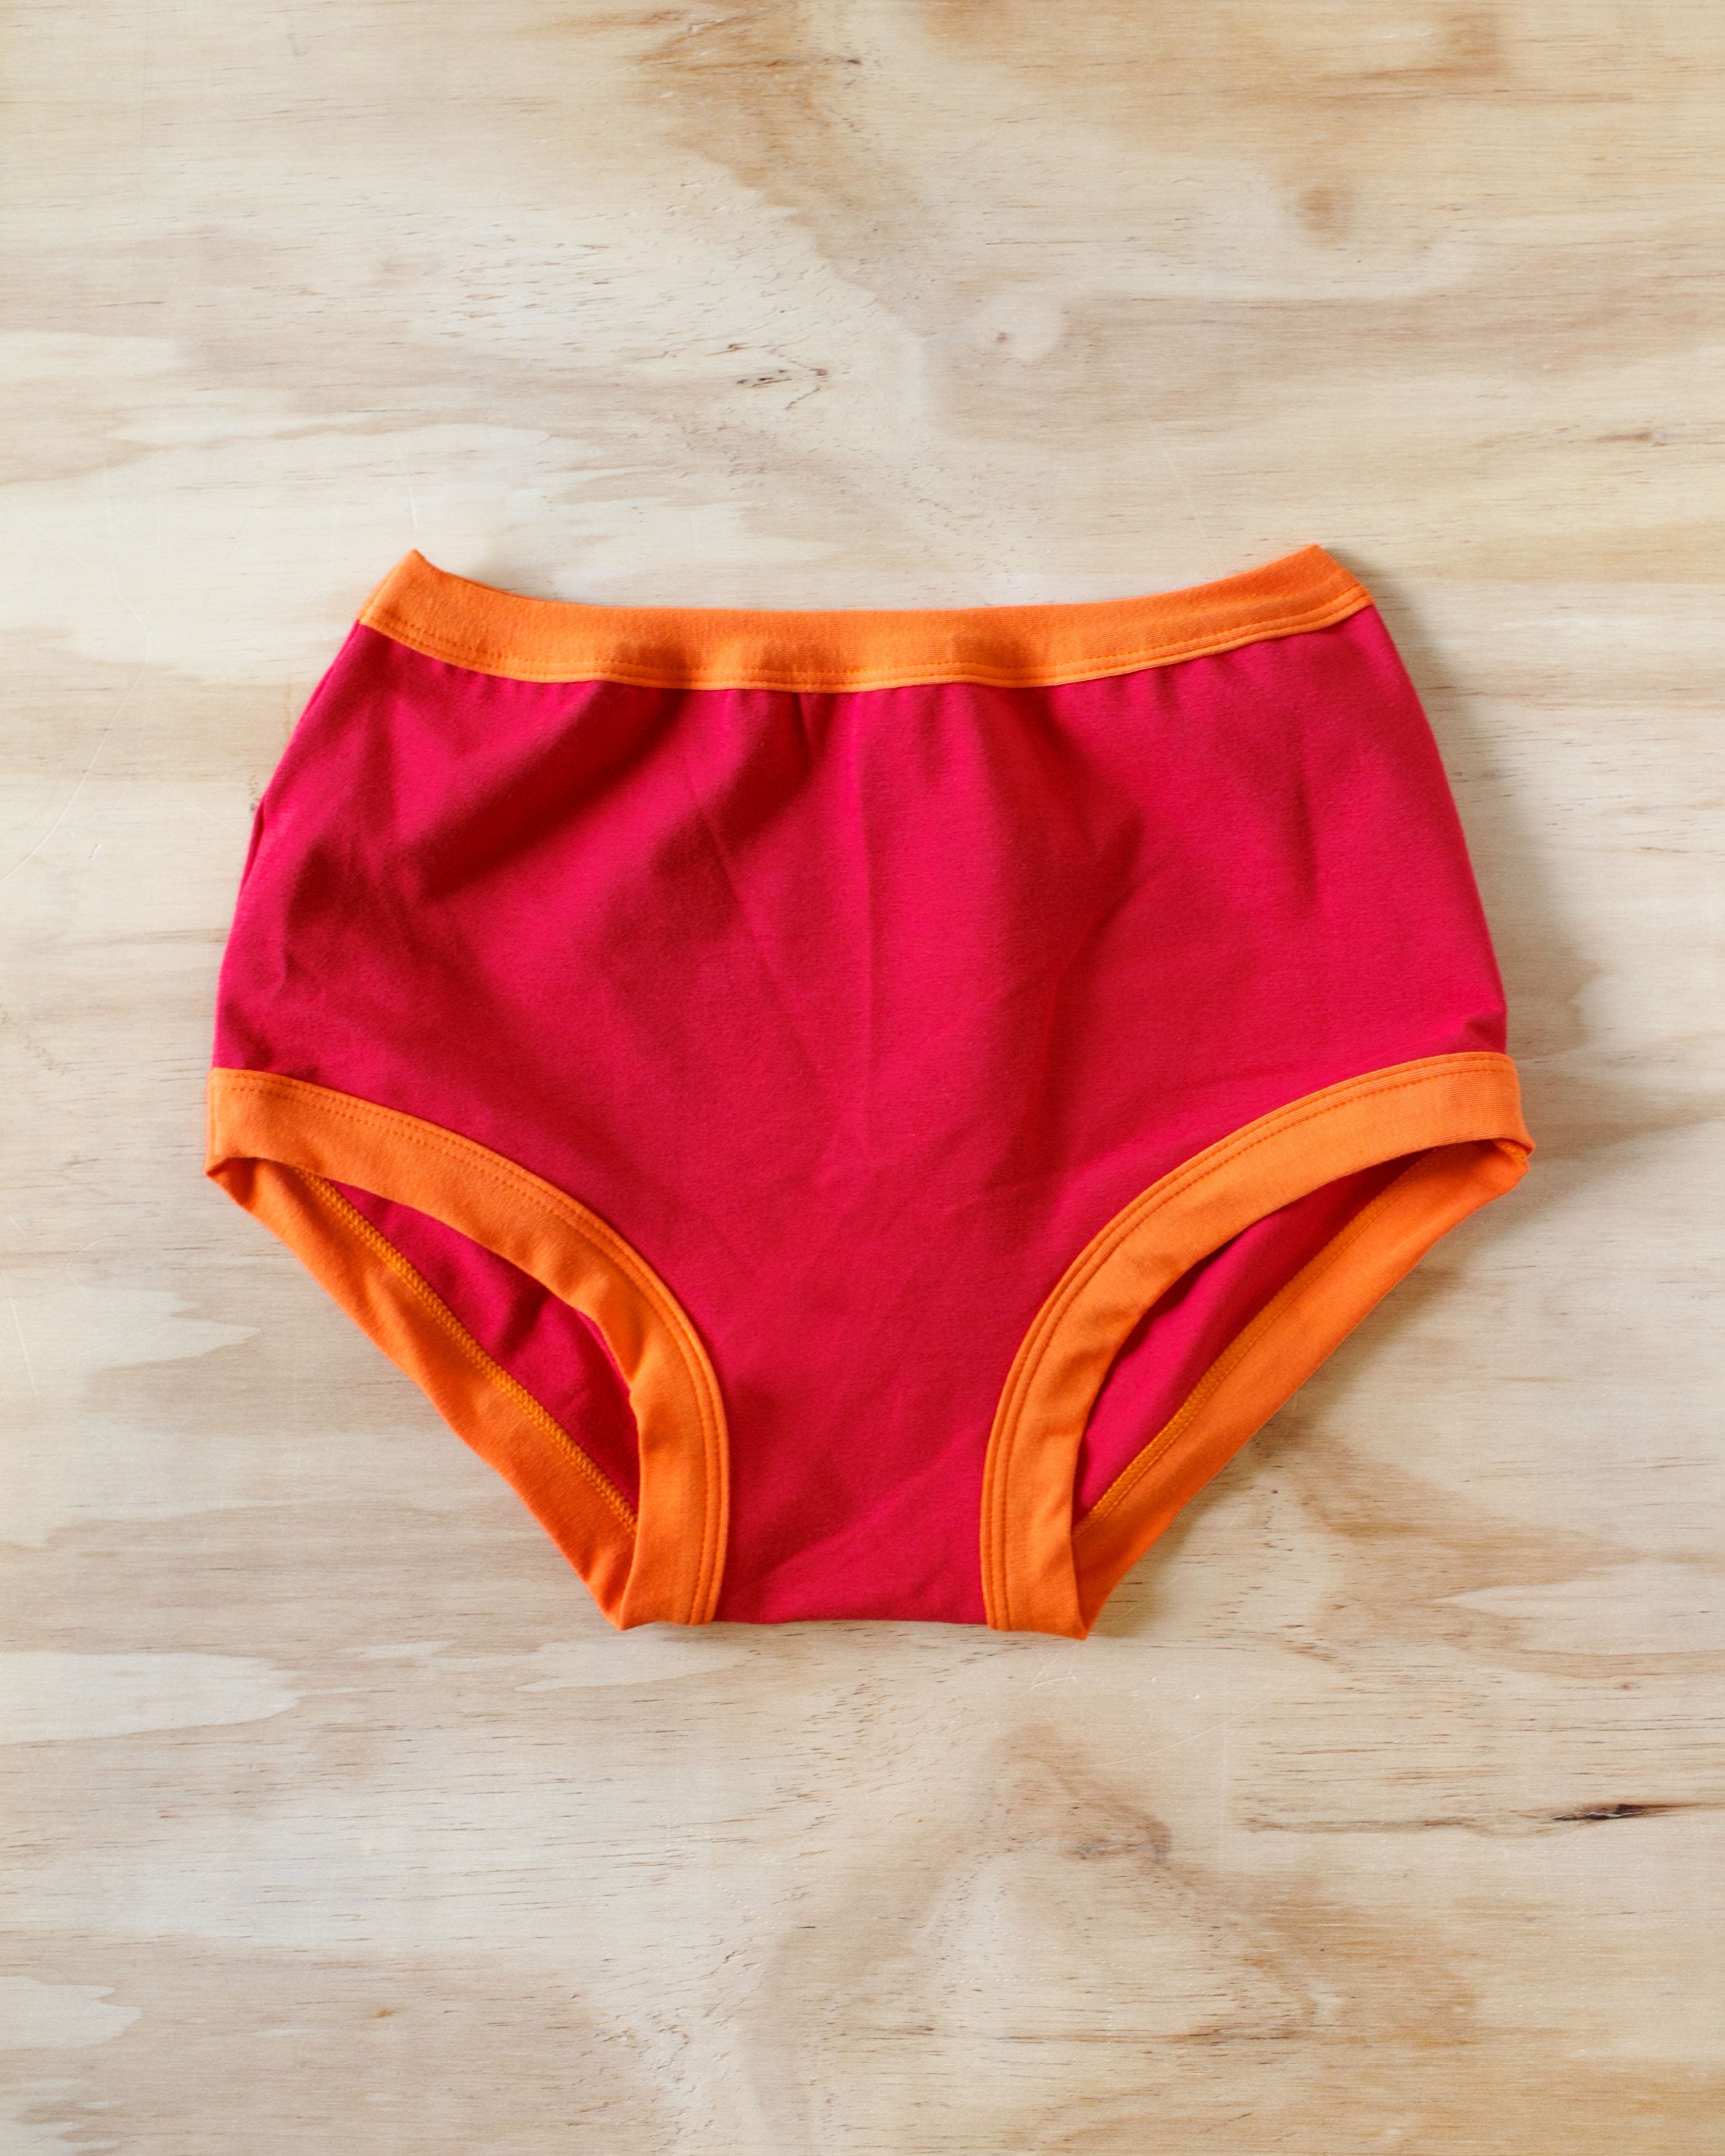 Flat lay on wood surface of Original style Pants on Fire: red with orange binding.